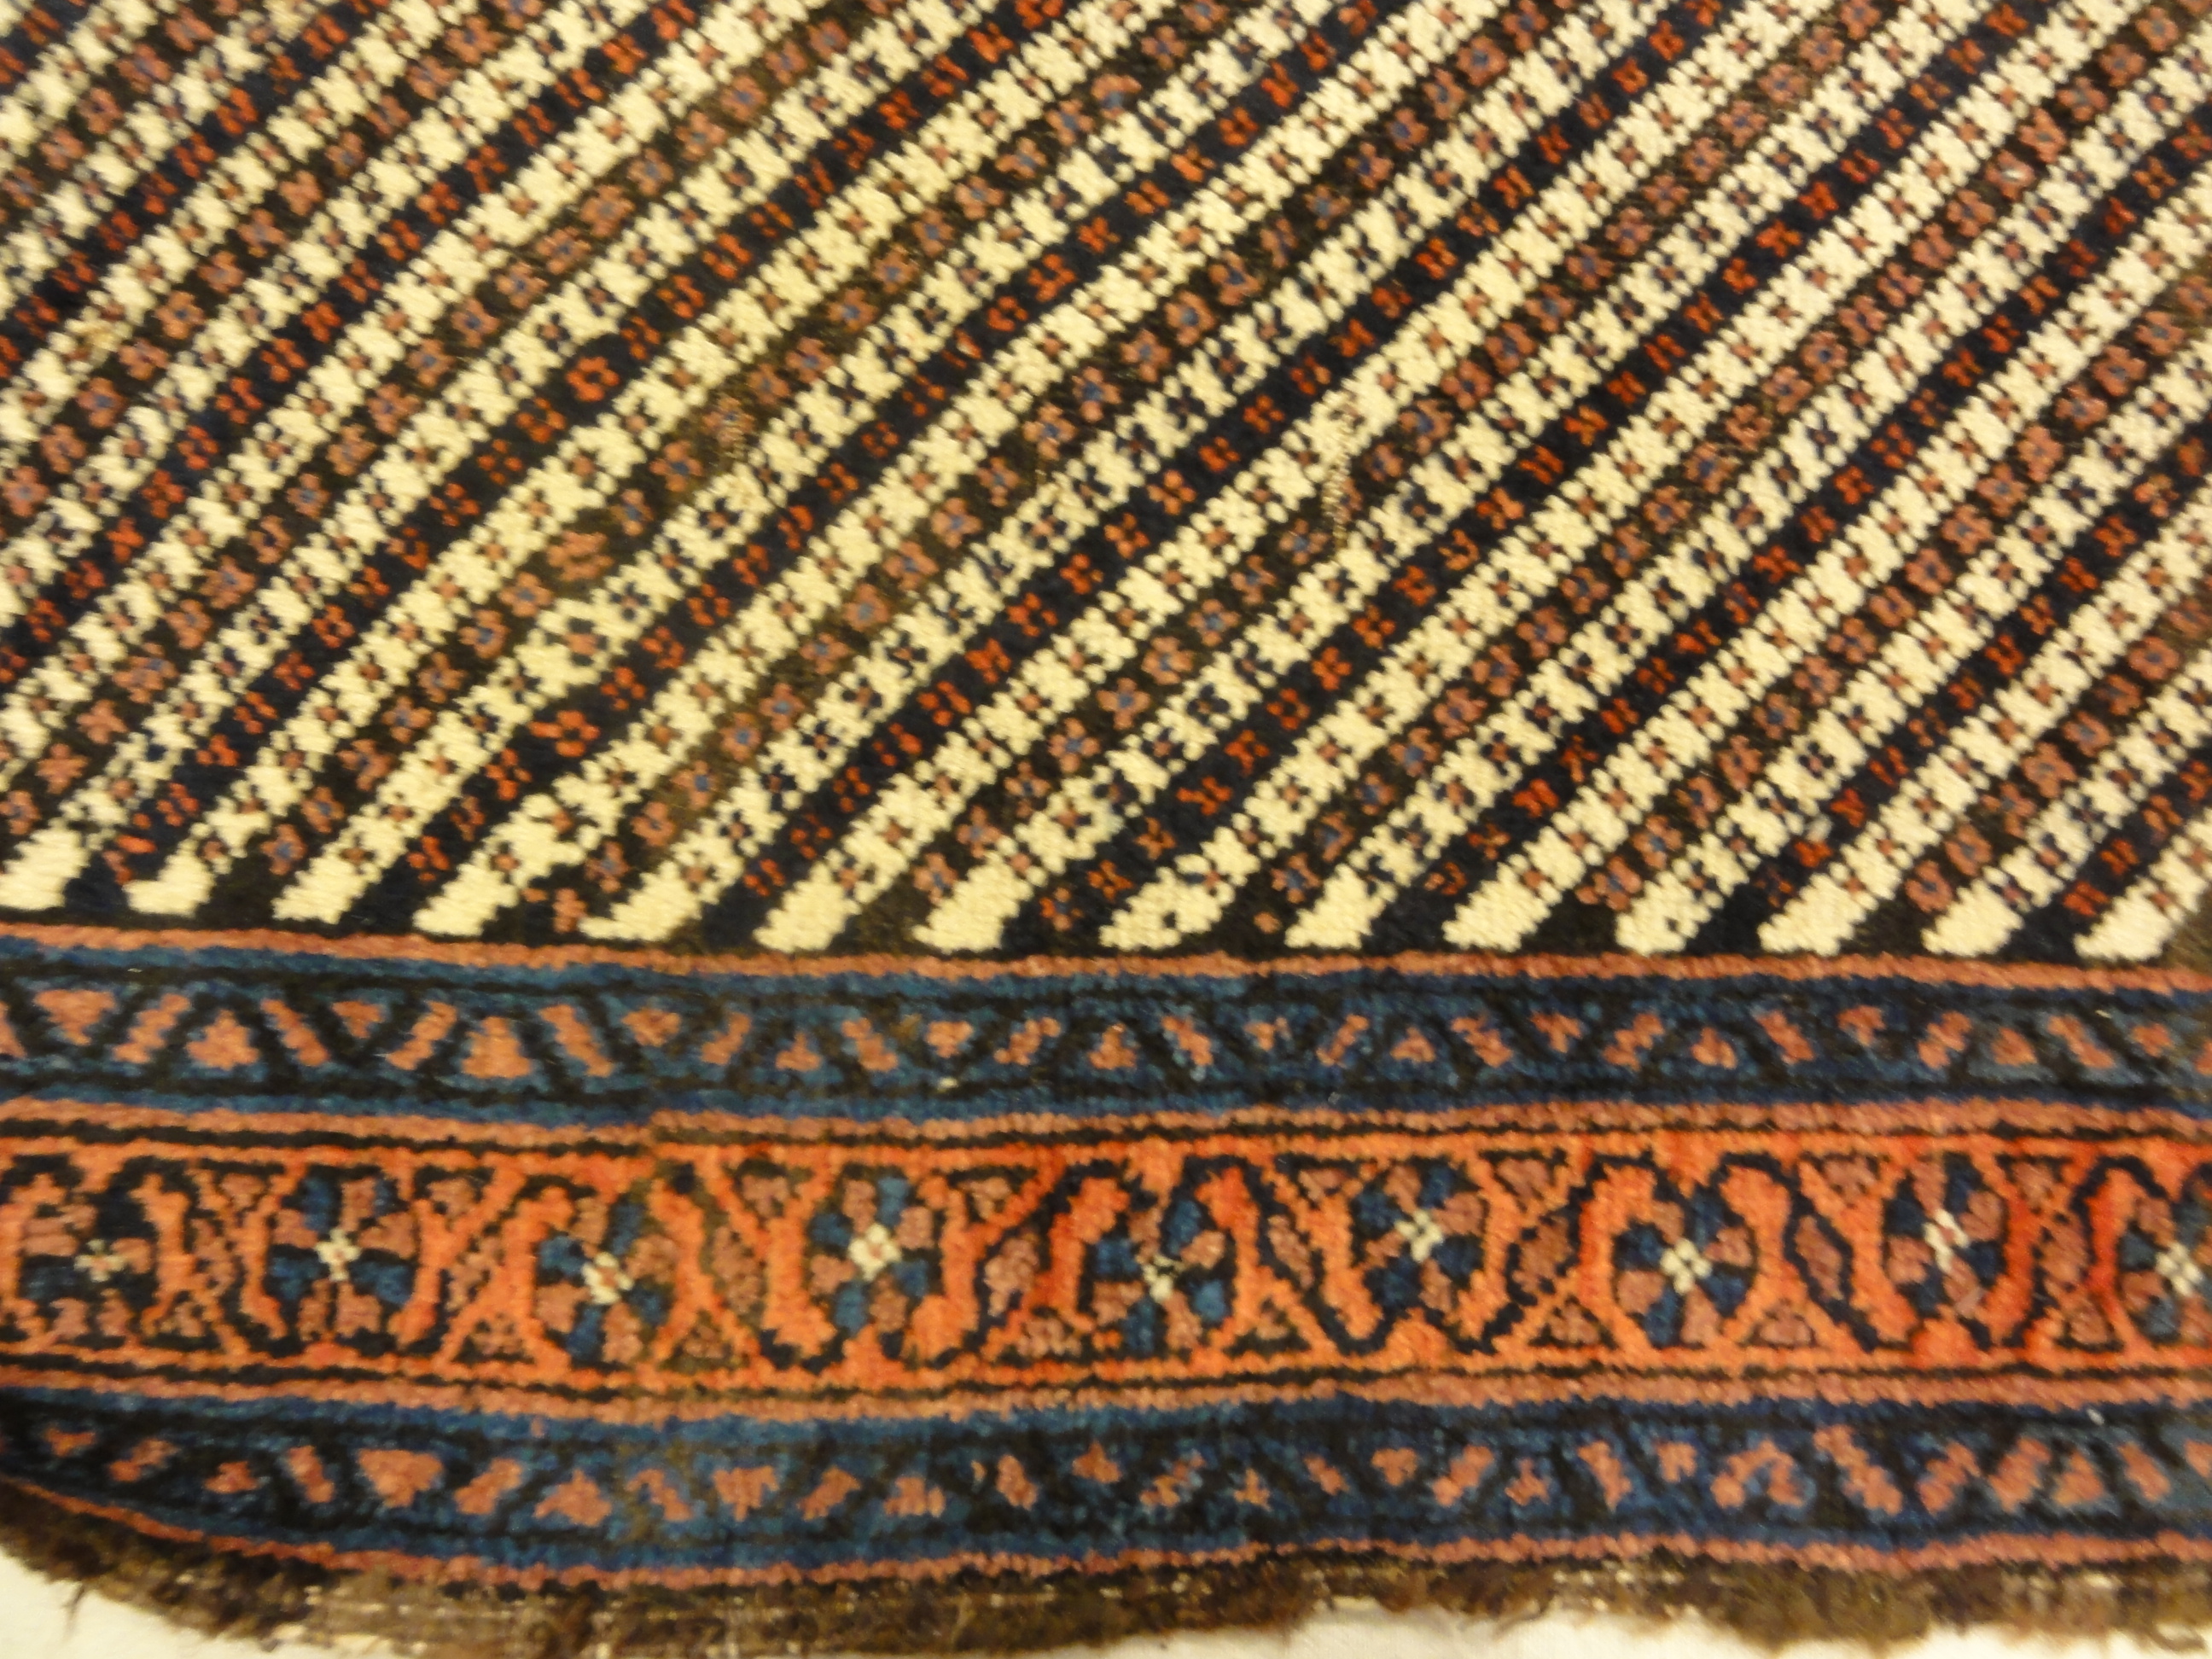 Unique Antique Persian Beluch Rug Rugs & More Santa Barbara Design Center. Primarily recognized by their exceptional wool quality and color combination.